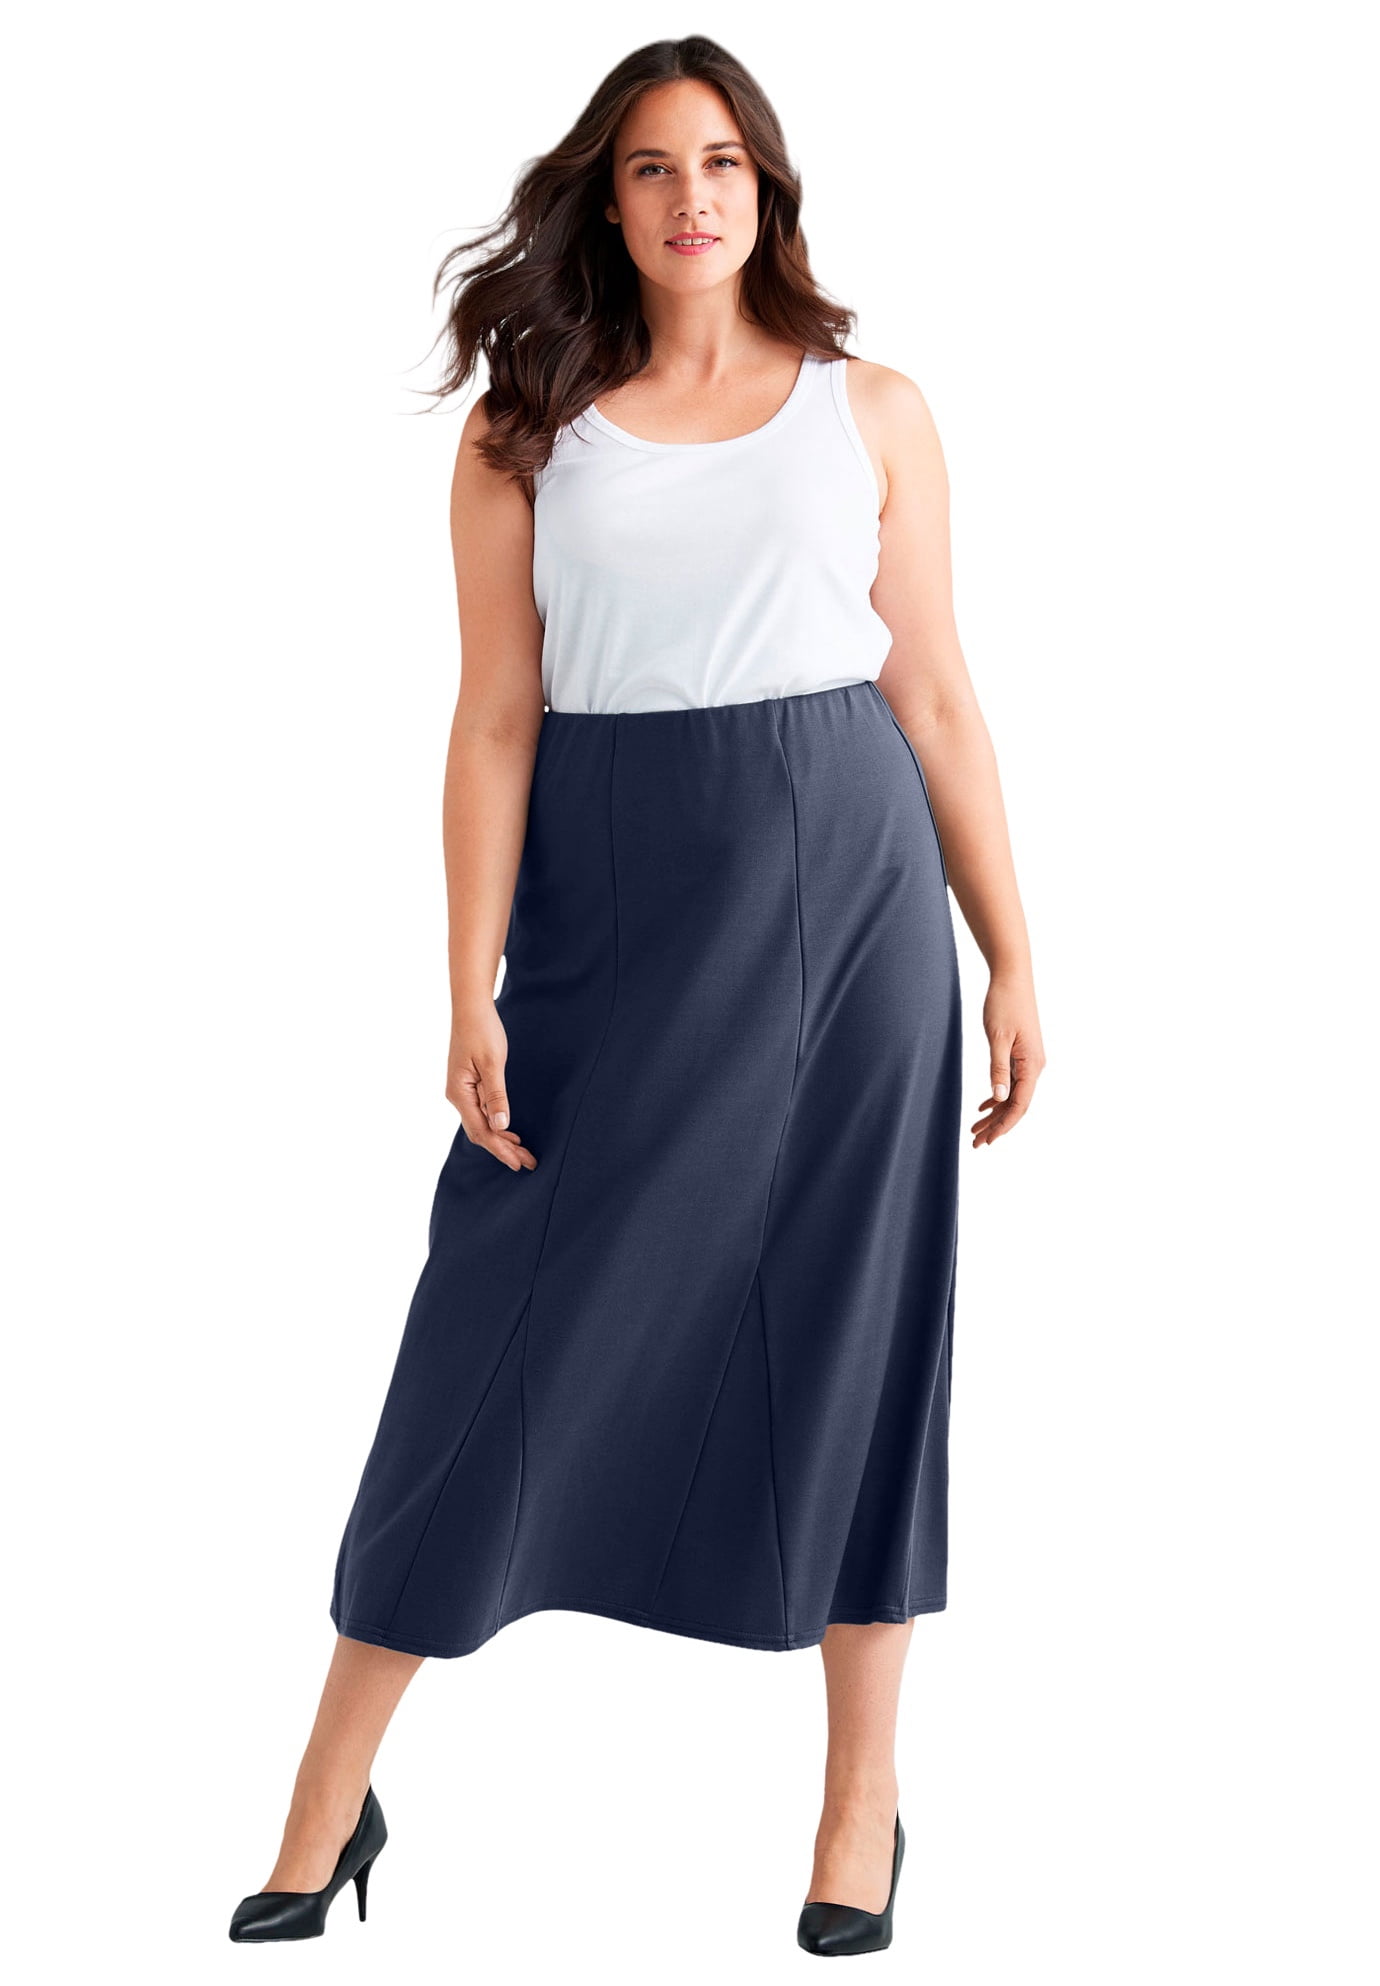 Womens Ladies Plus Size Plain Stretch Flared Maxi Elasticated Skirt 14 TO 28 